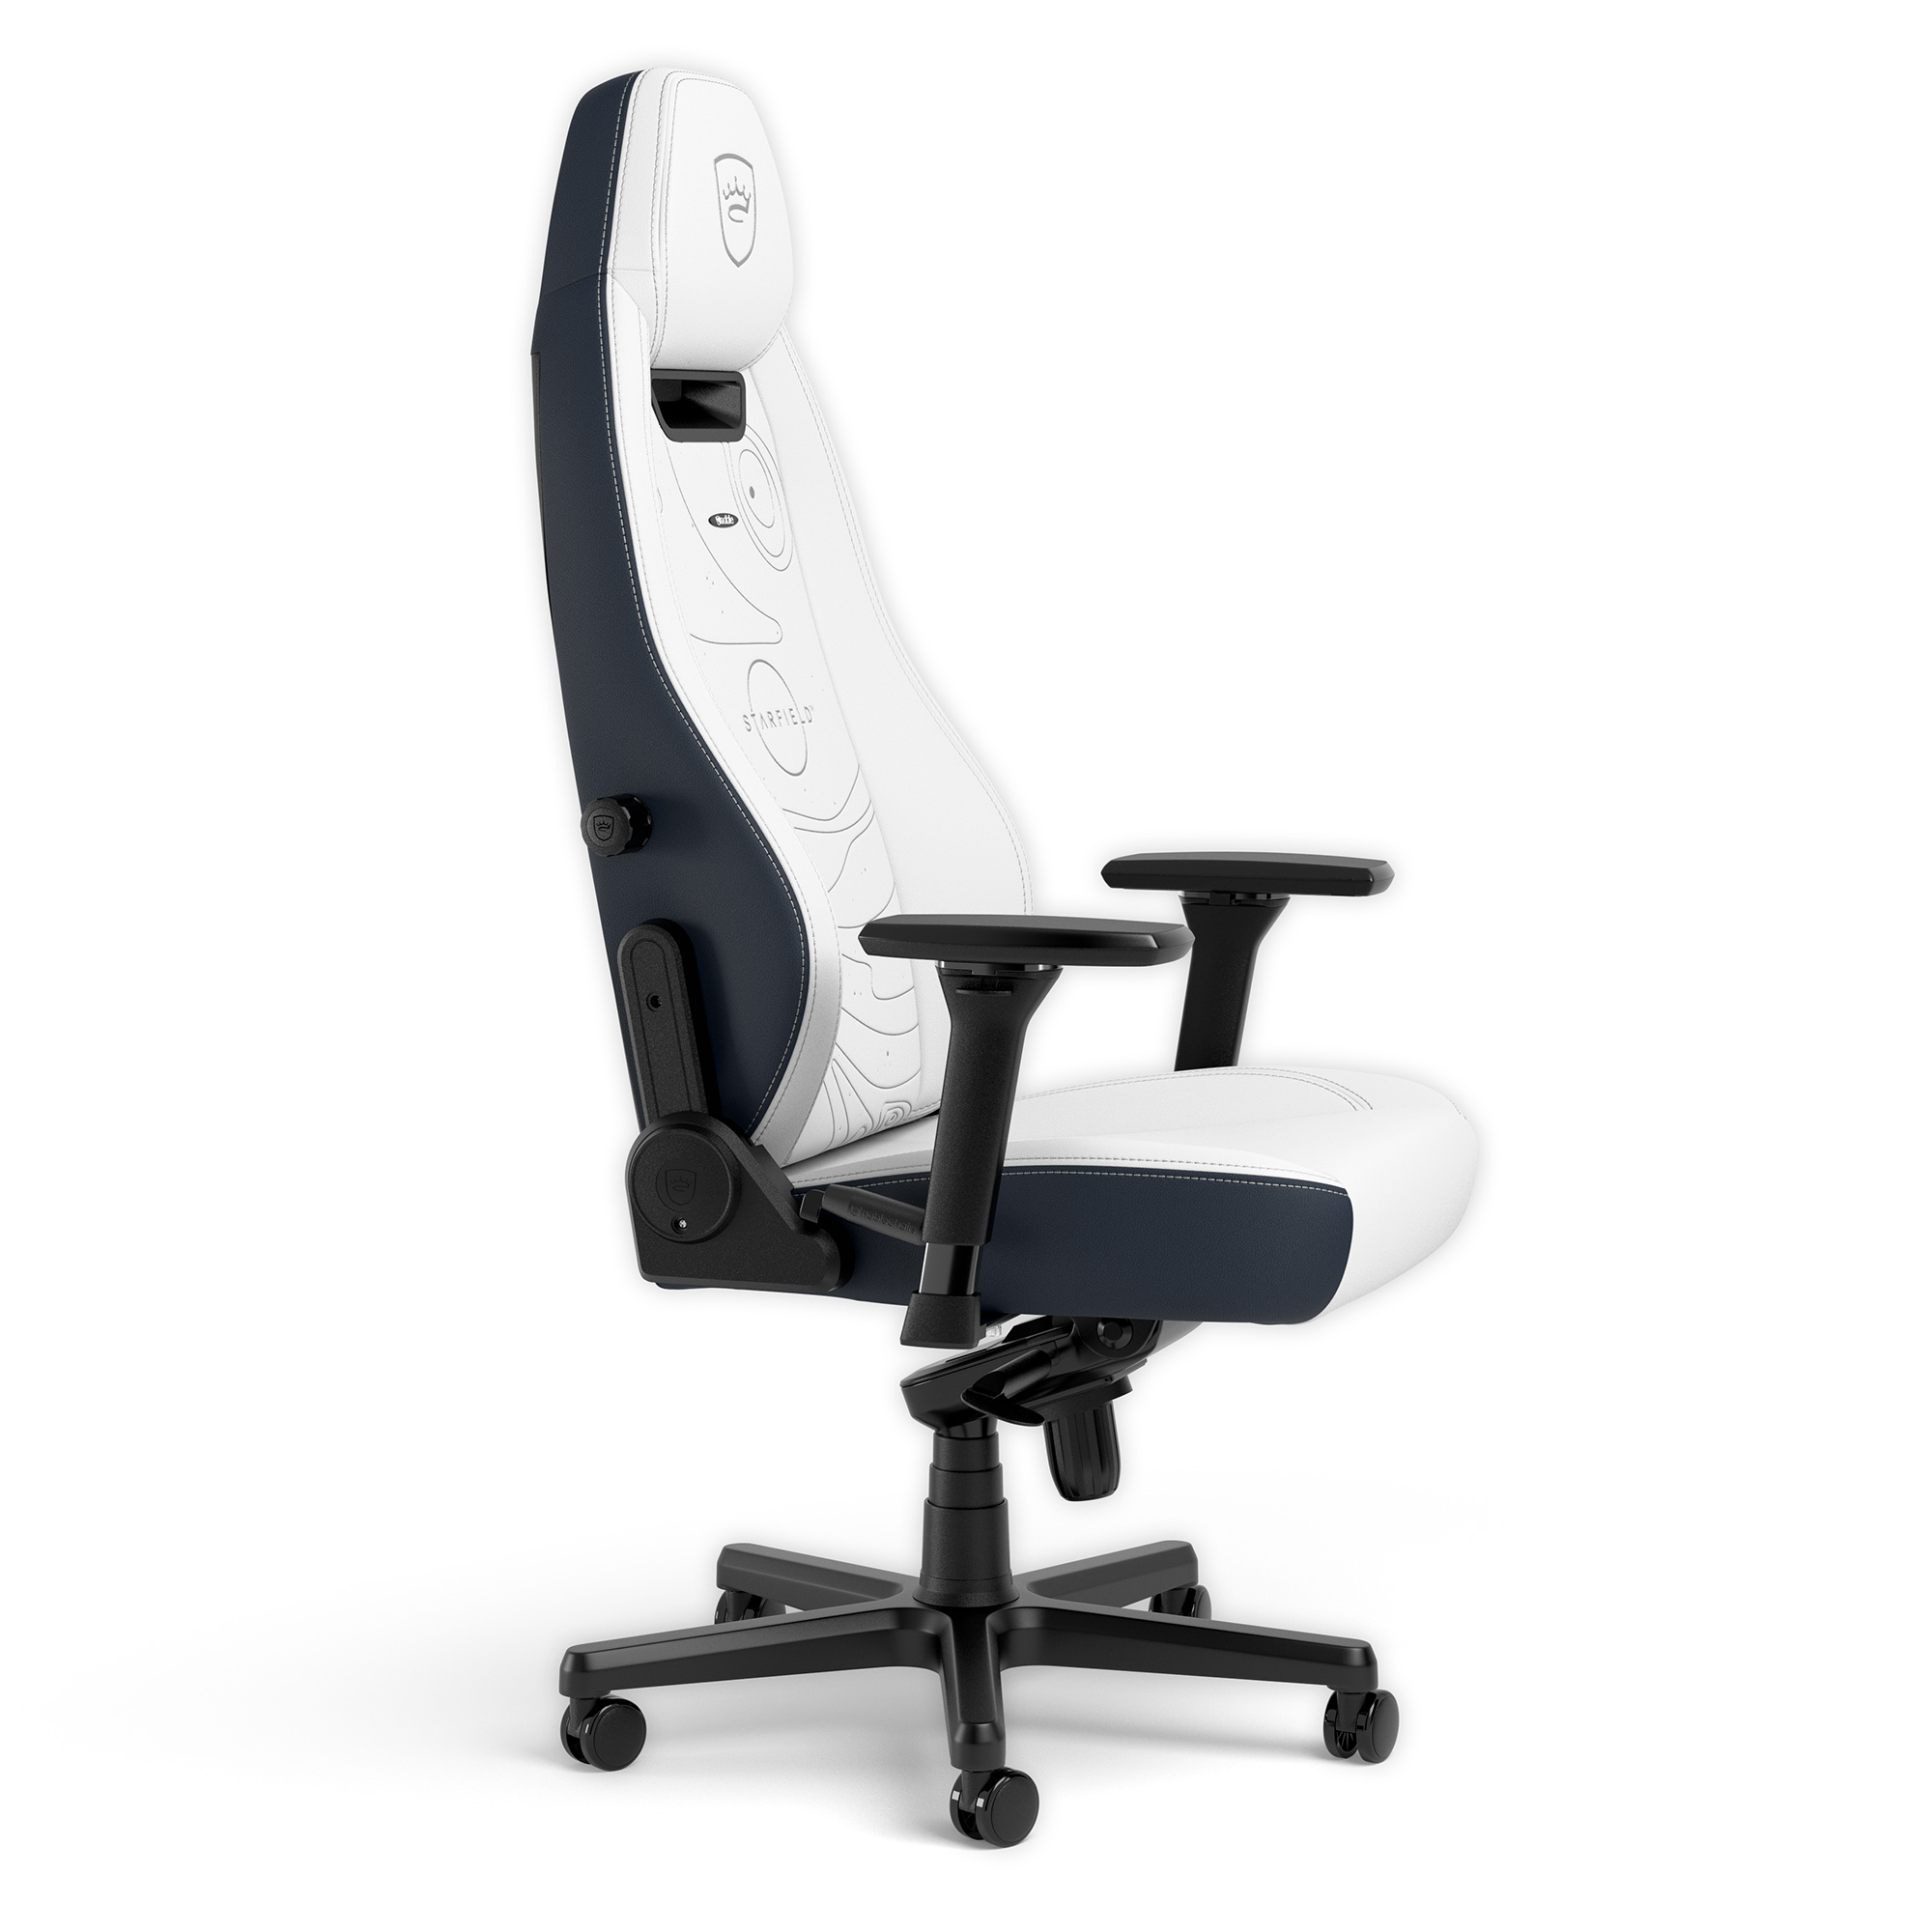 noblechairs - noblechairs LEGEND Gaming Chair - Starfield Edition